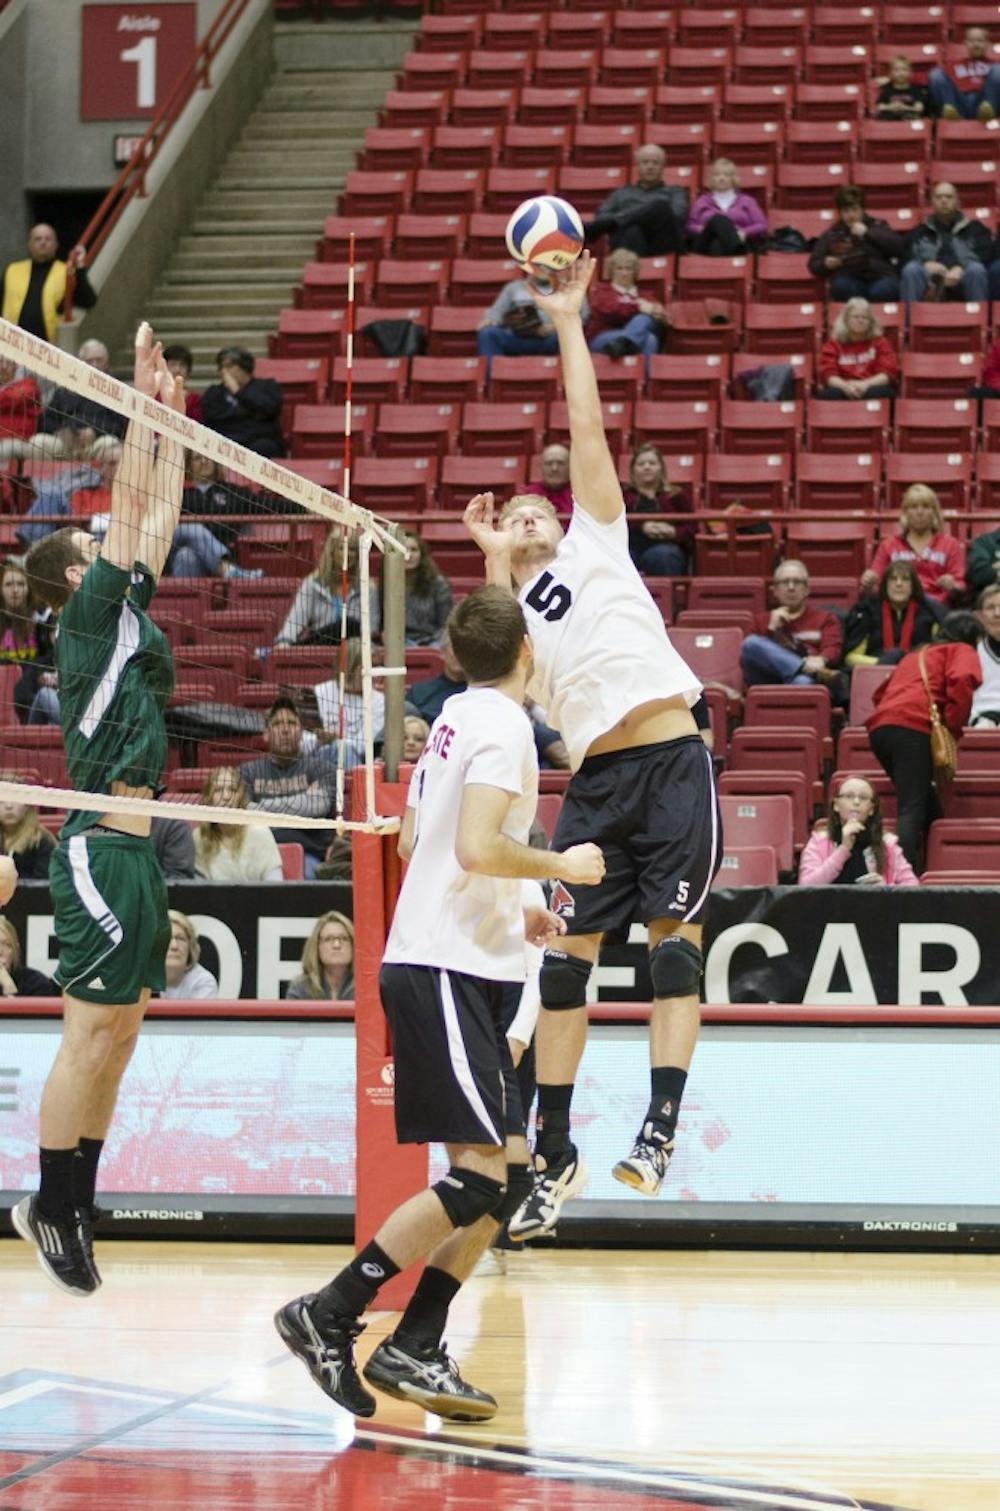 Senior setter Graham McIlvaine hits the ball over the net in the first set against Mount Olive on March 1 at Worthen Arena. DN PHOTO BREANNA DAUGHERTY 